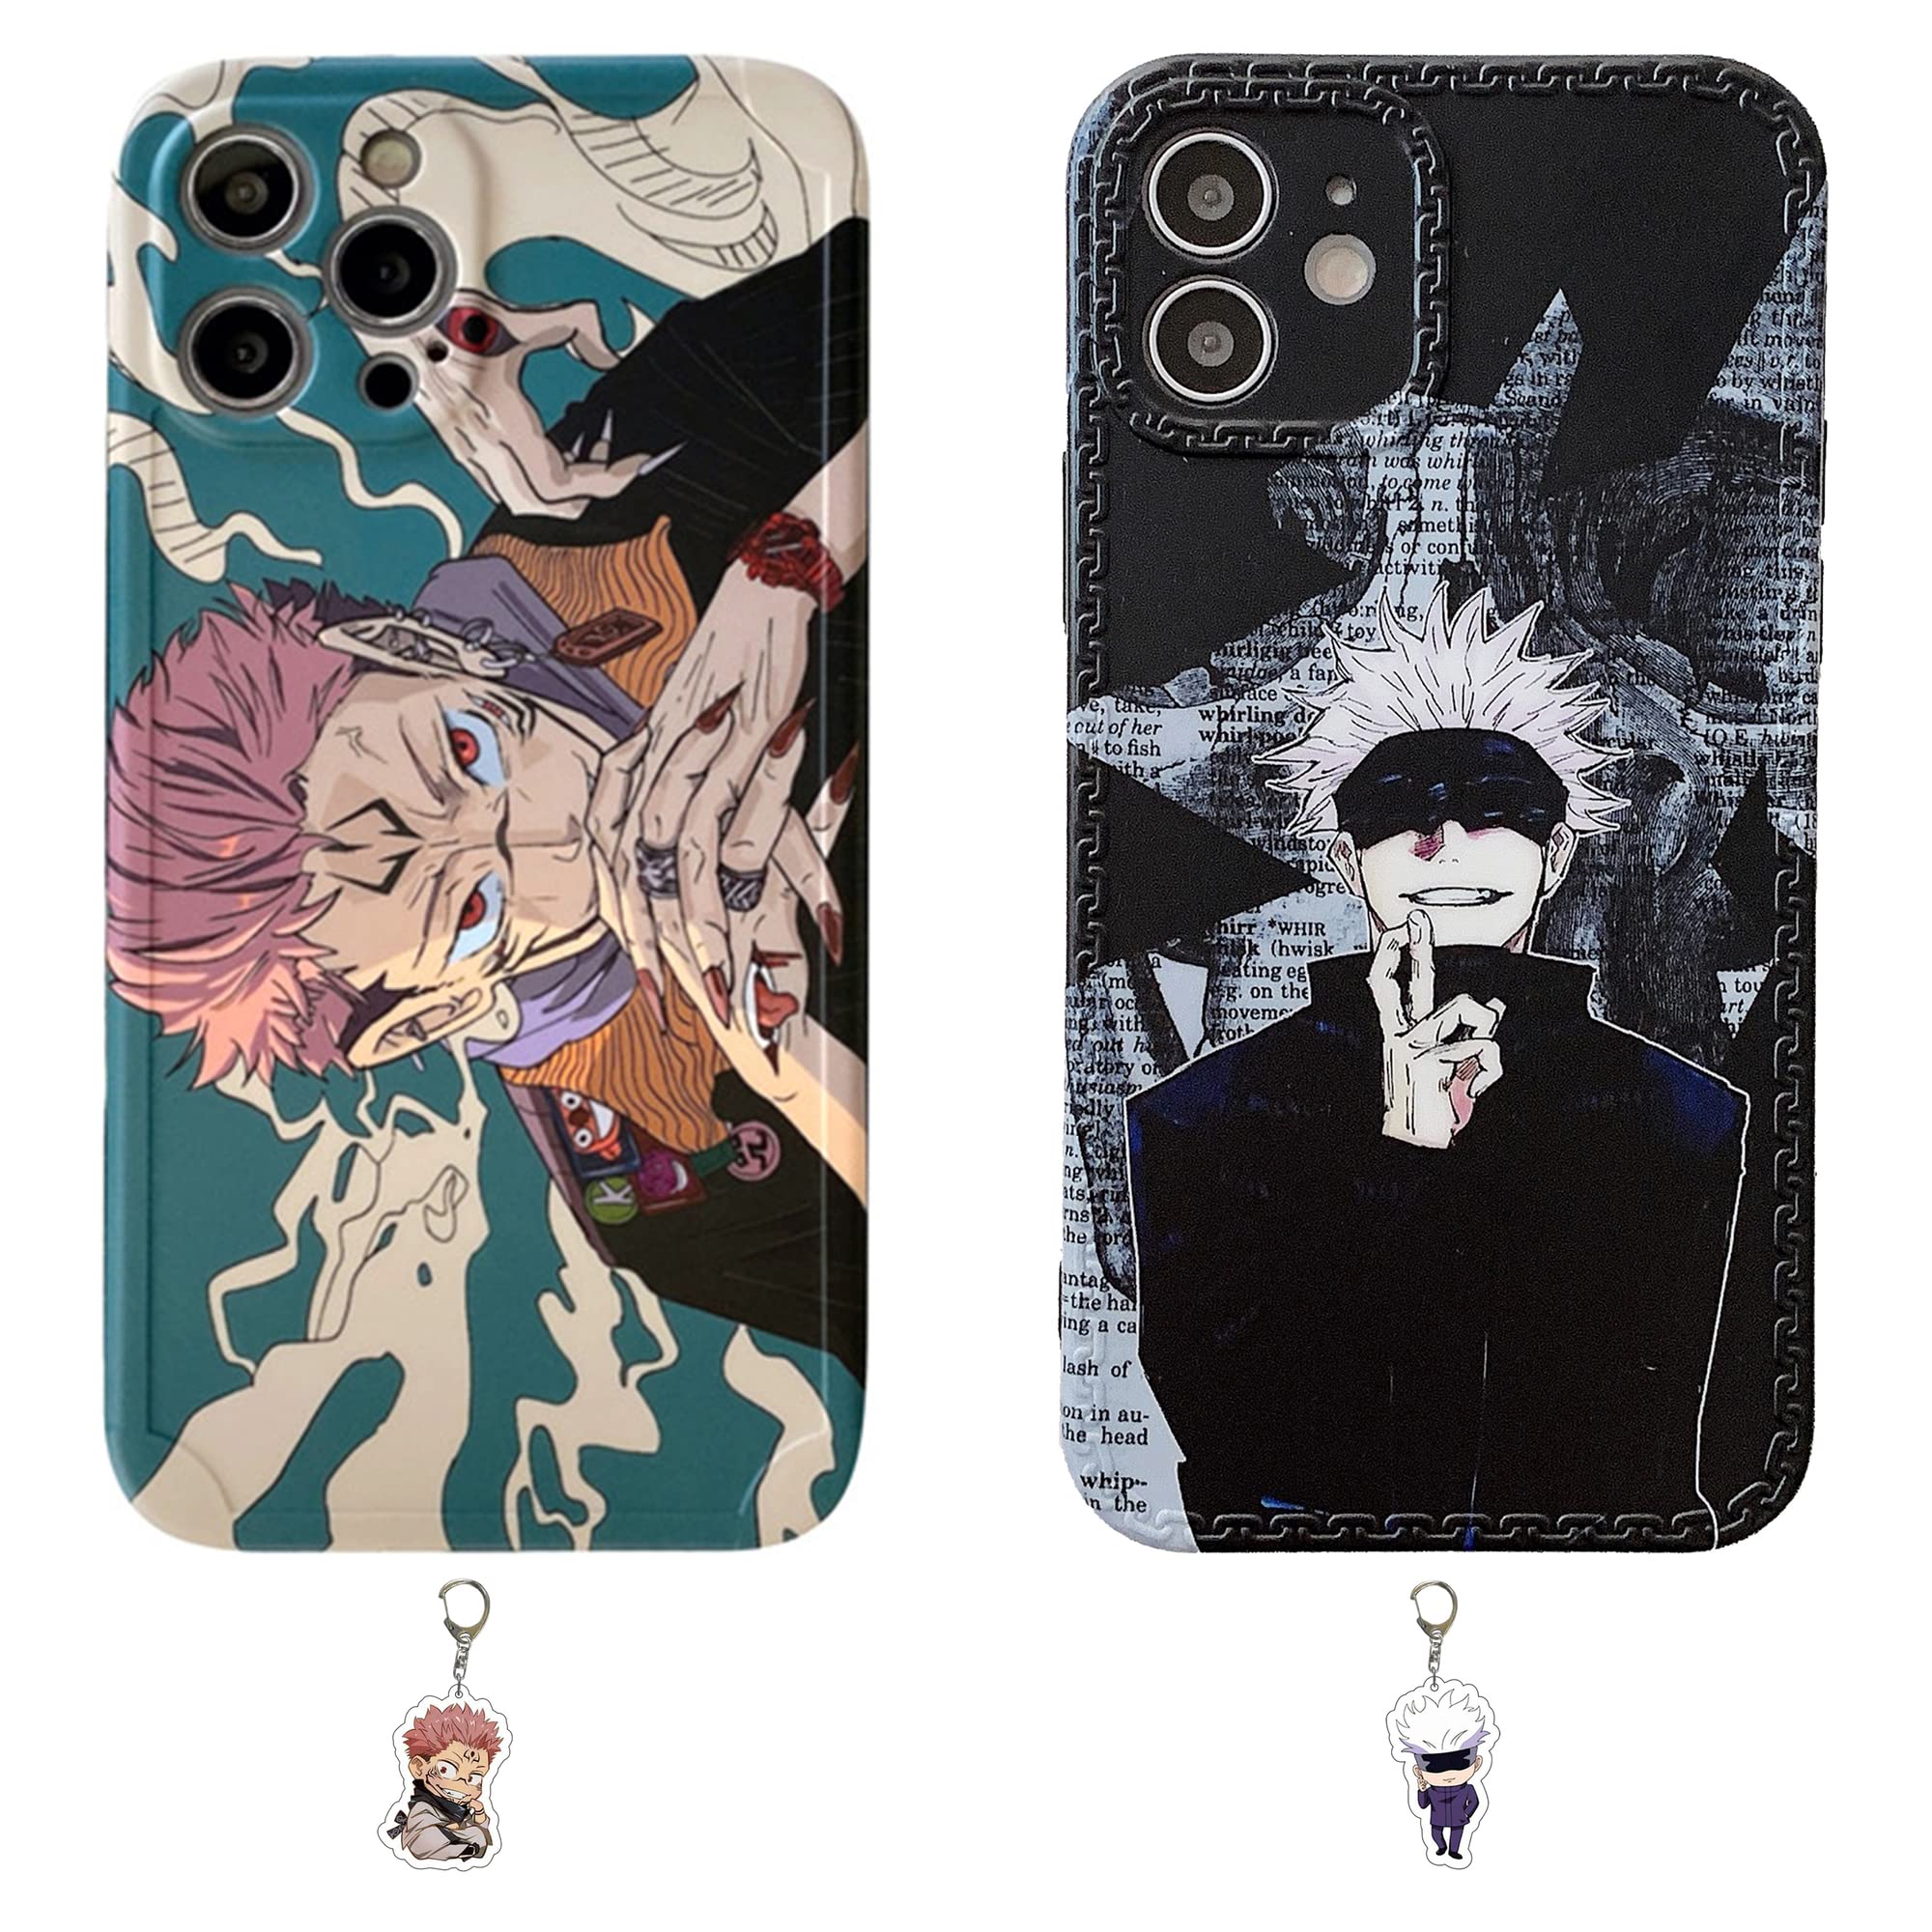 Anime Demon Slayer Kimetsu no Yaiba Black-Silicone-Case -Fashion-Simpsons-for-iPhone-11-11Pro-XS-MAX-XR-X 6s 8 7 plus Case For  Samsung S8 9 10 Note 8 iPhone Xs Xr Couqe HuaWei P30 Cover | Wish